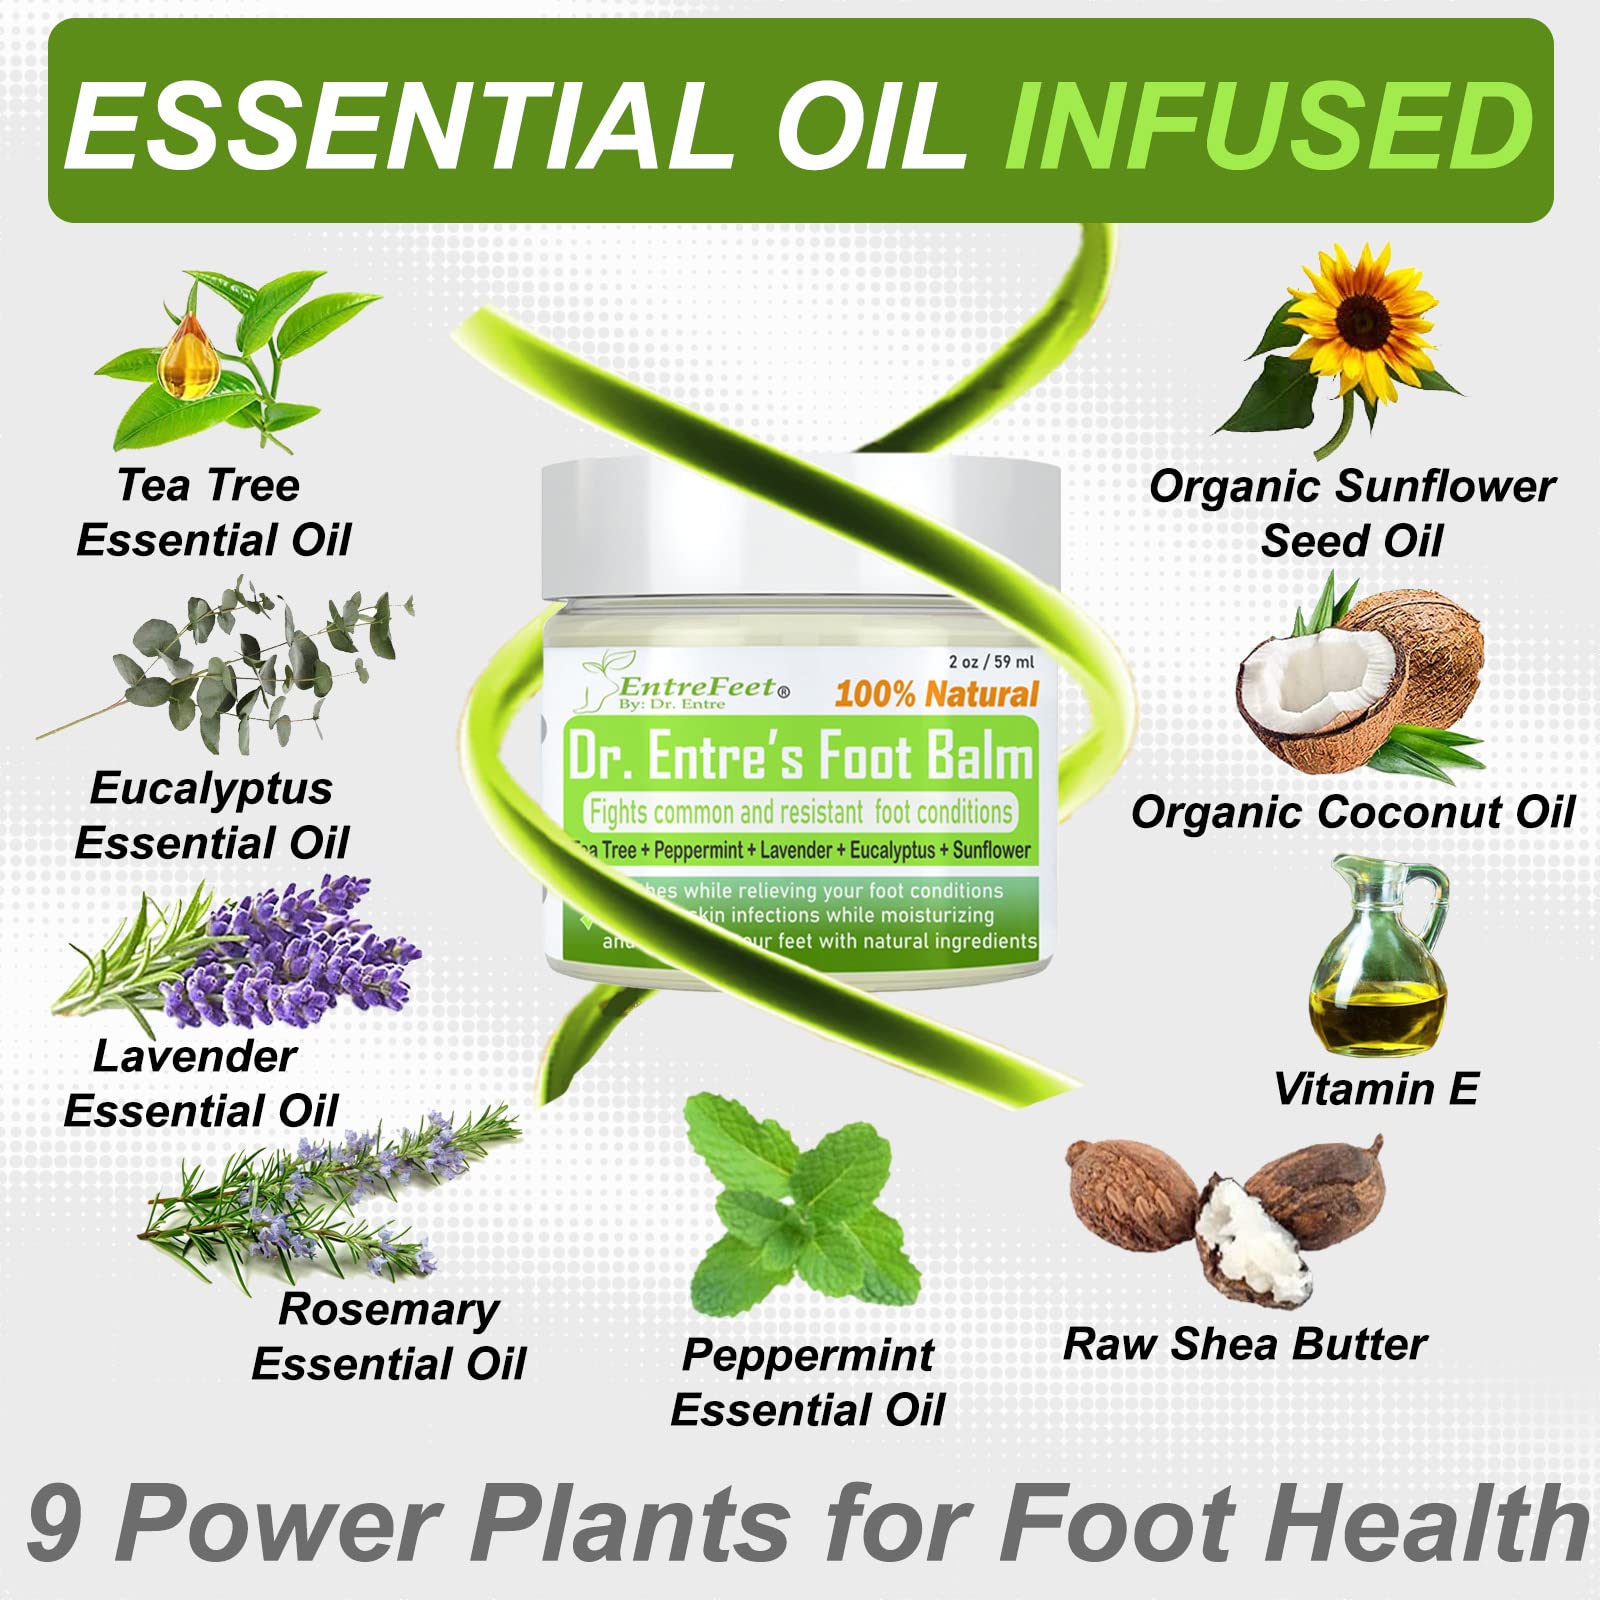 Dr. Entre's Foot Balm: Tea Tree Oil & Shea Butter Based - Organic Treatment Cream for Athletes Foot, Dry Feet, Cracked Heels, Itching, and Odor - Foot Care E-Book Included